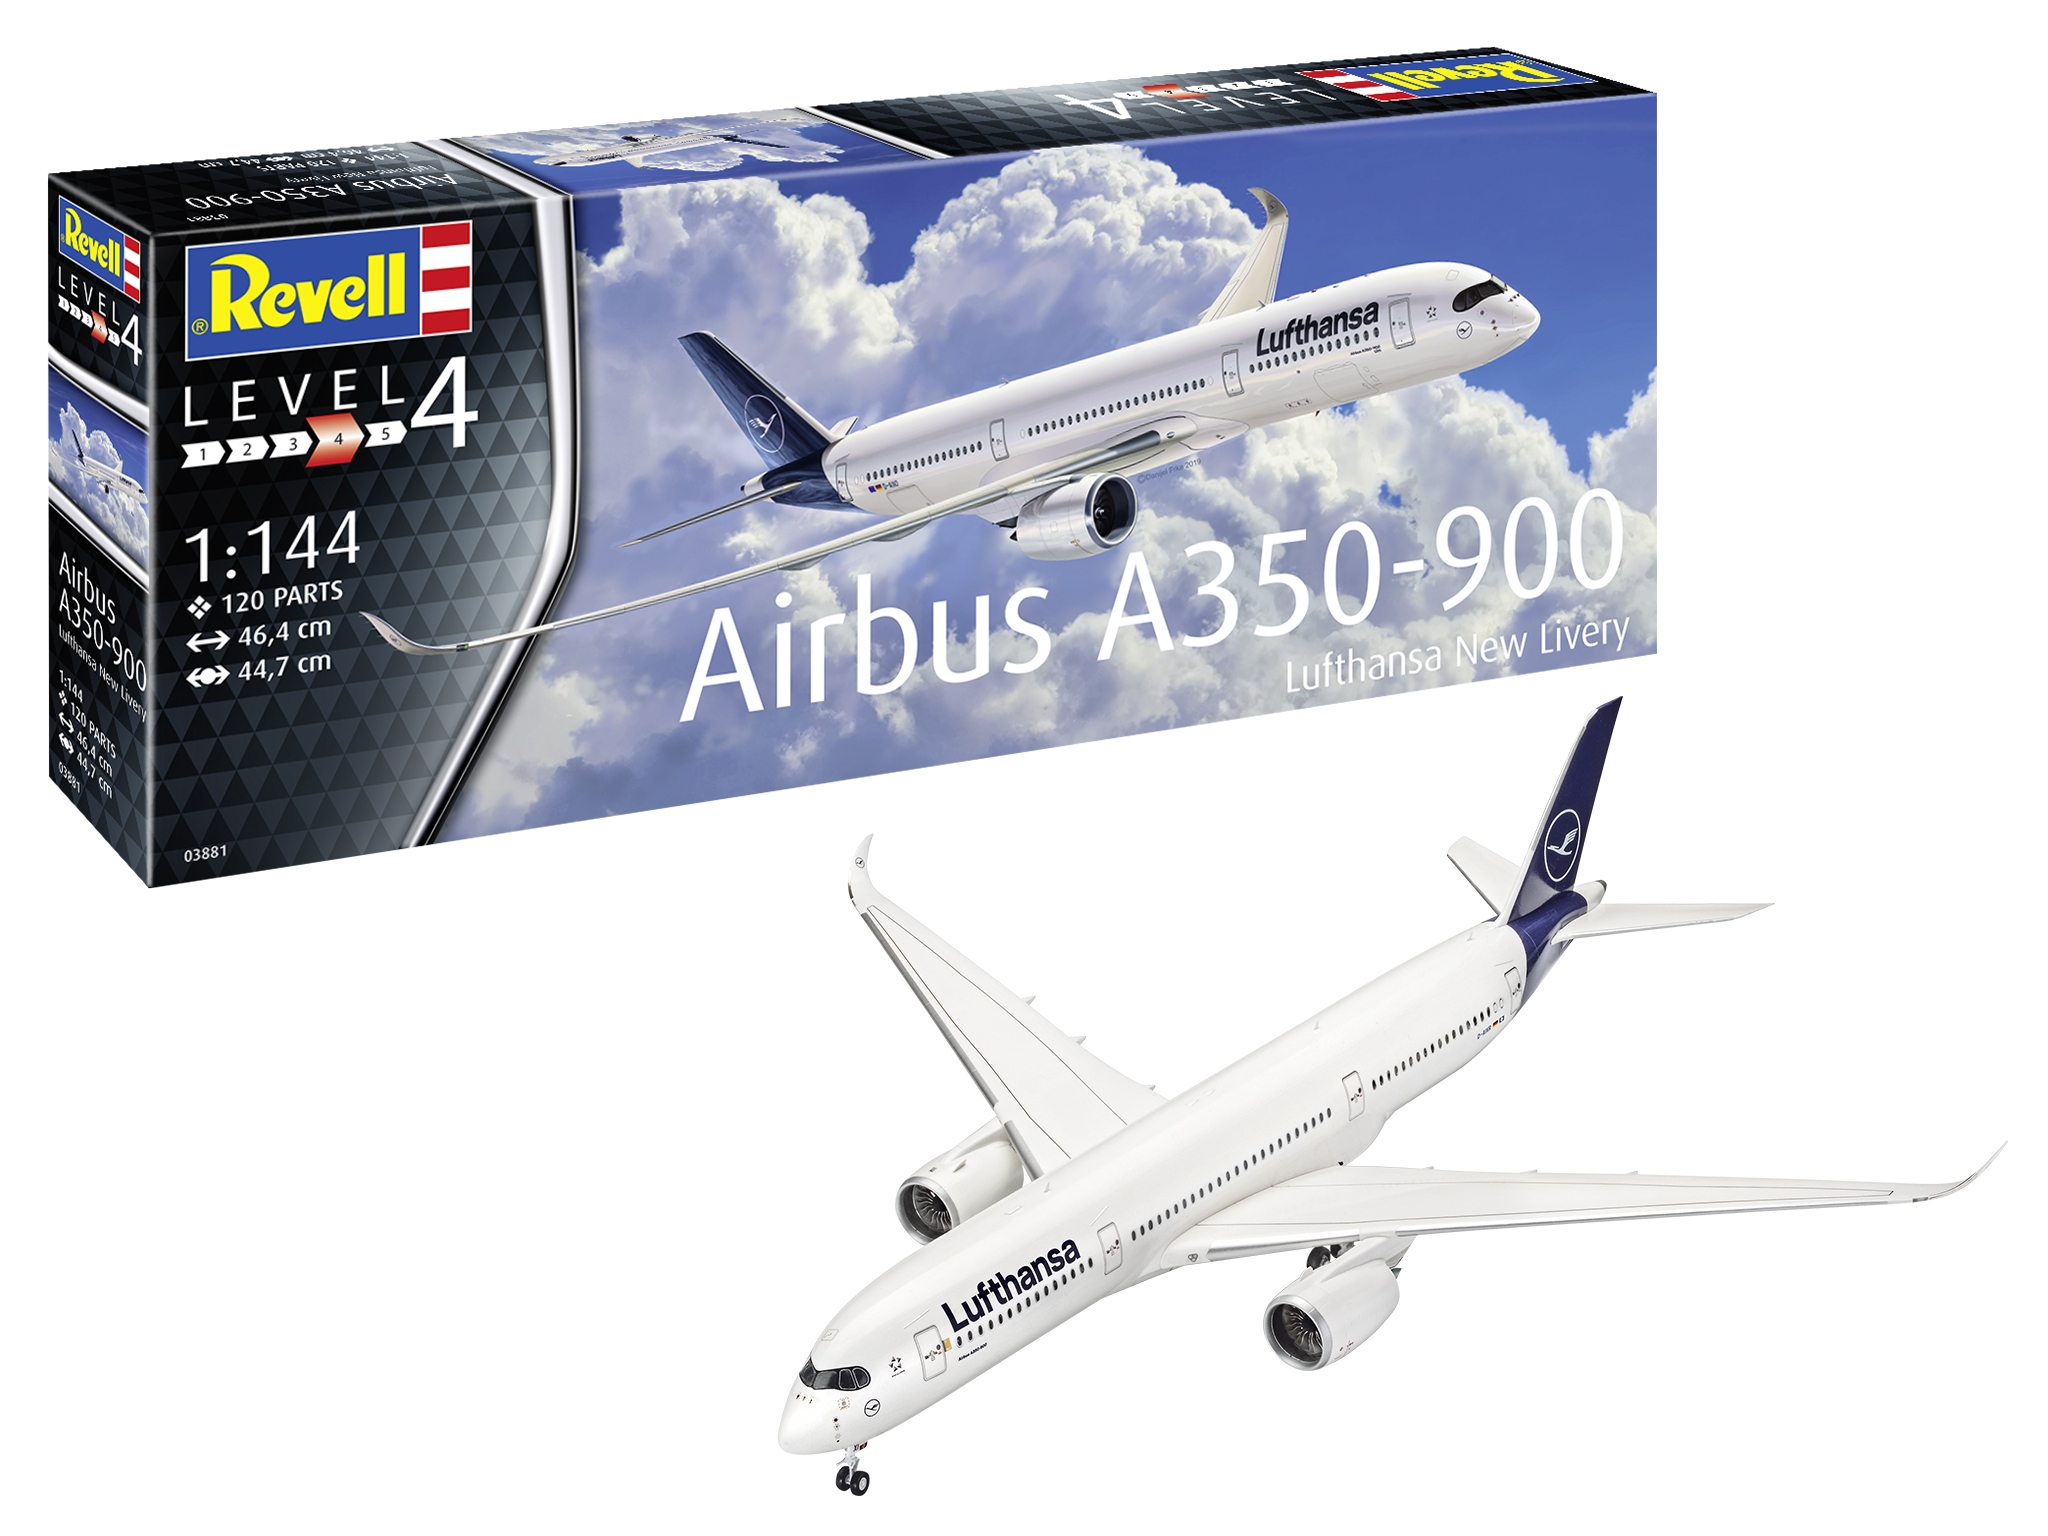 Revell Airbus A350-900 Lufthansa New Livery in 1:144 bouwpakket